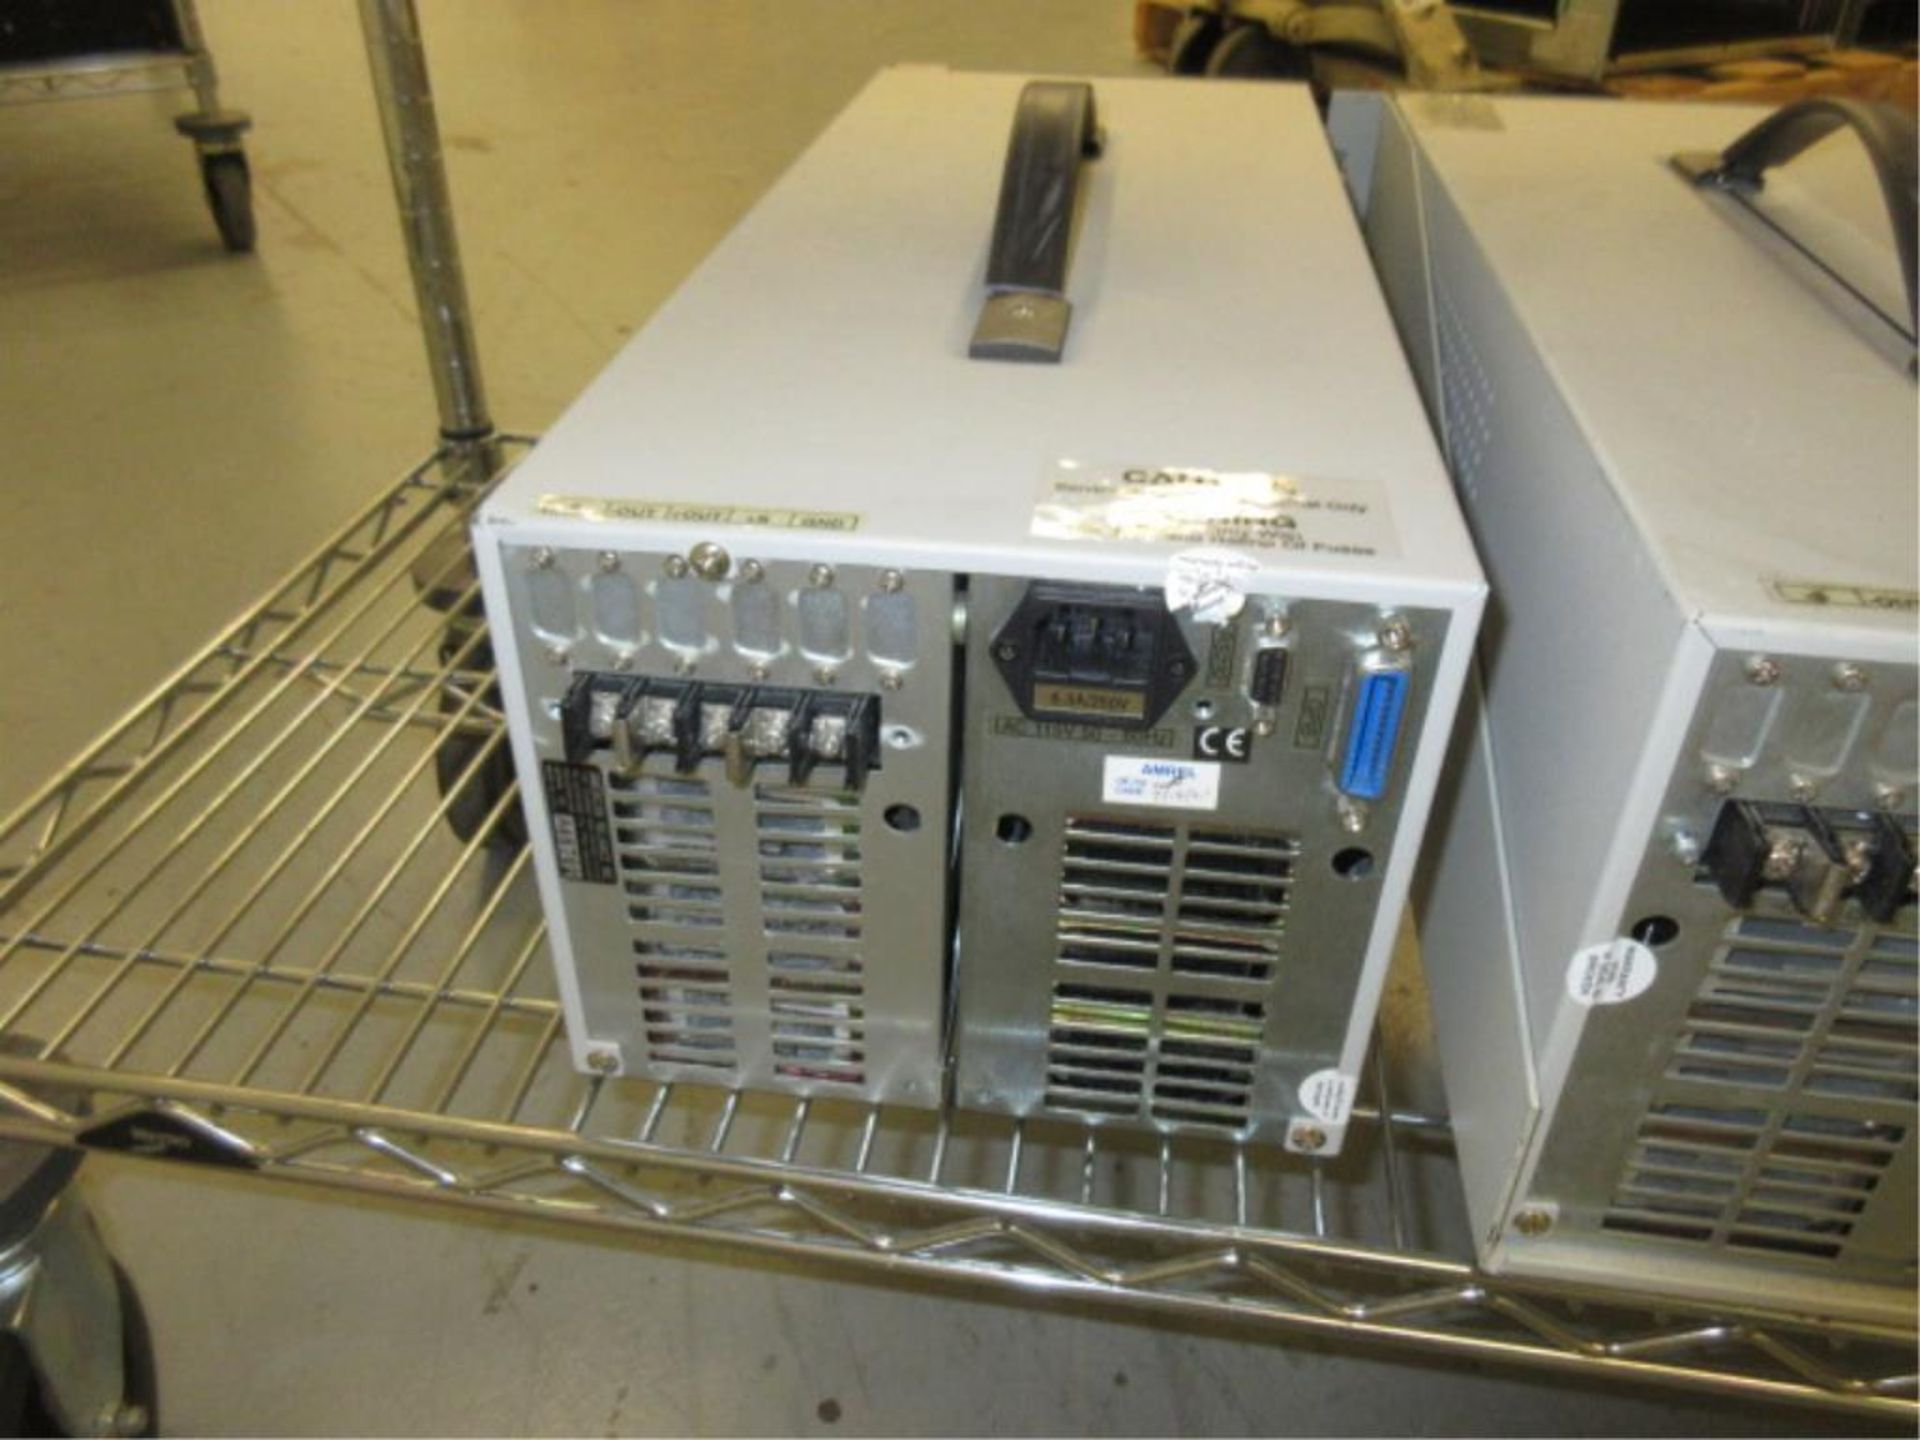 Amrel DC Power Supply. Lot of (3) PD60-6 Programmable DC Power Supplies, consisting of (2) with - Image 7 of 7